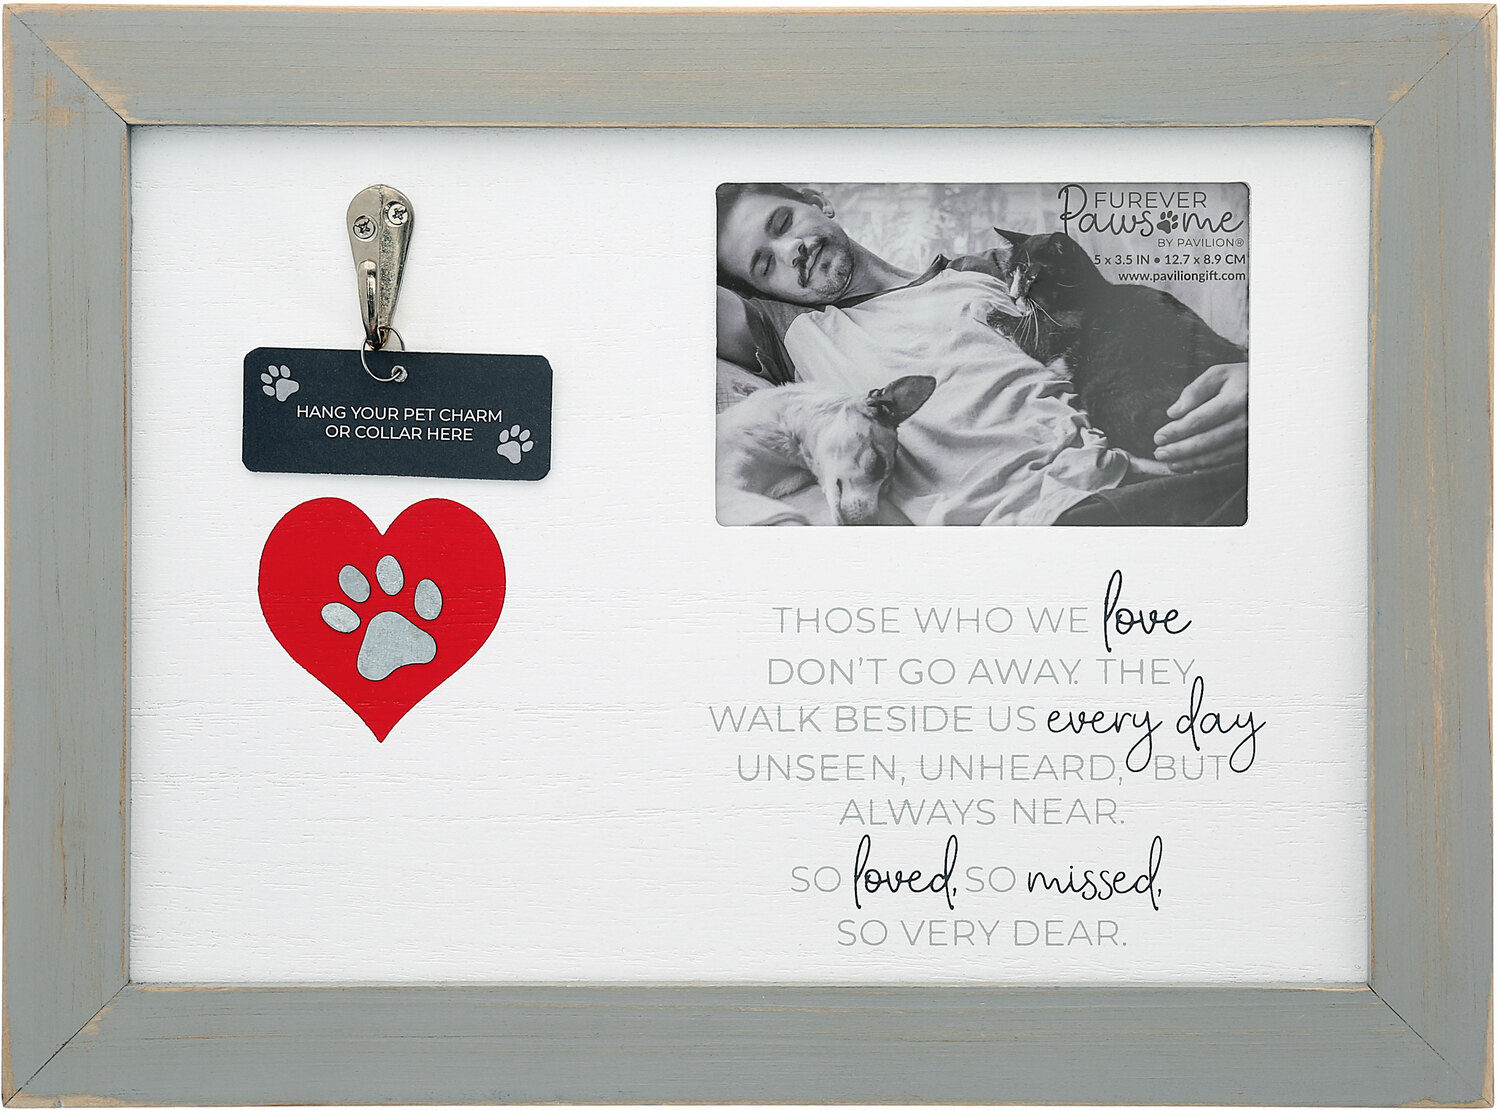 Missed So Very Dear by Furever Pawsome - Missed So Very Dear - 12" x 9" Pet Collar Memorial Frame (Holds 5" x 3.5" Photo)